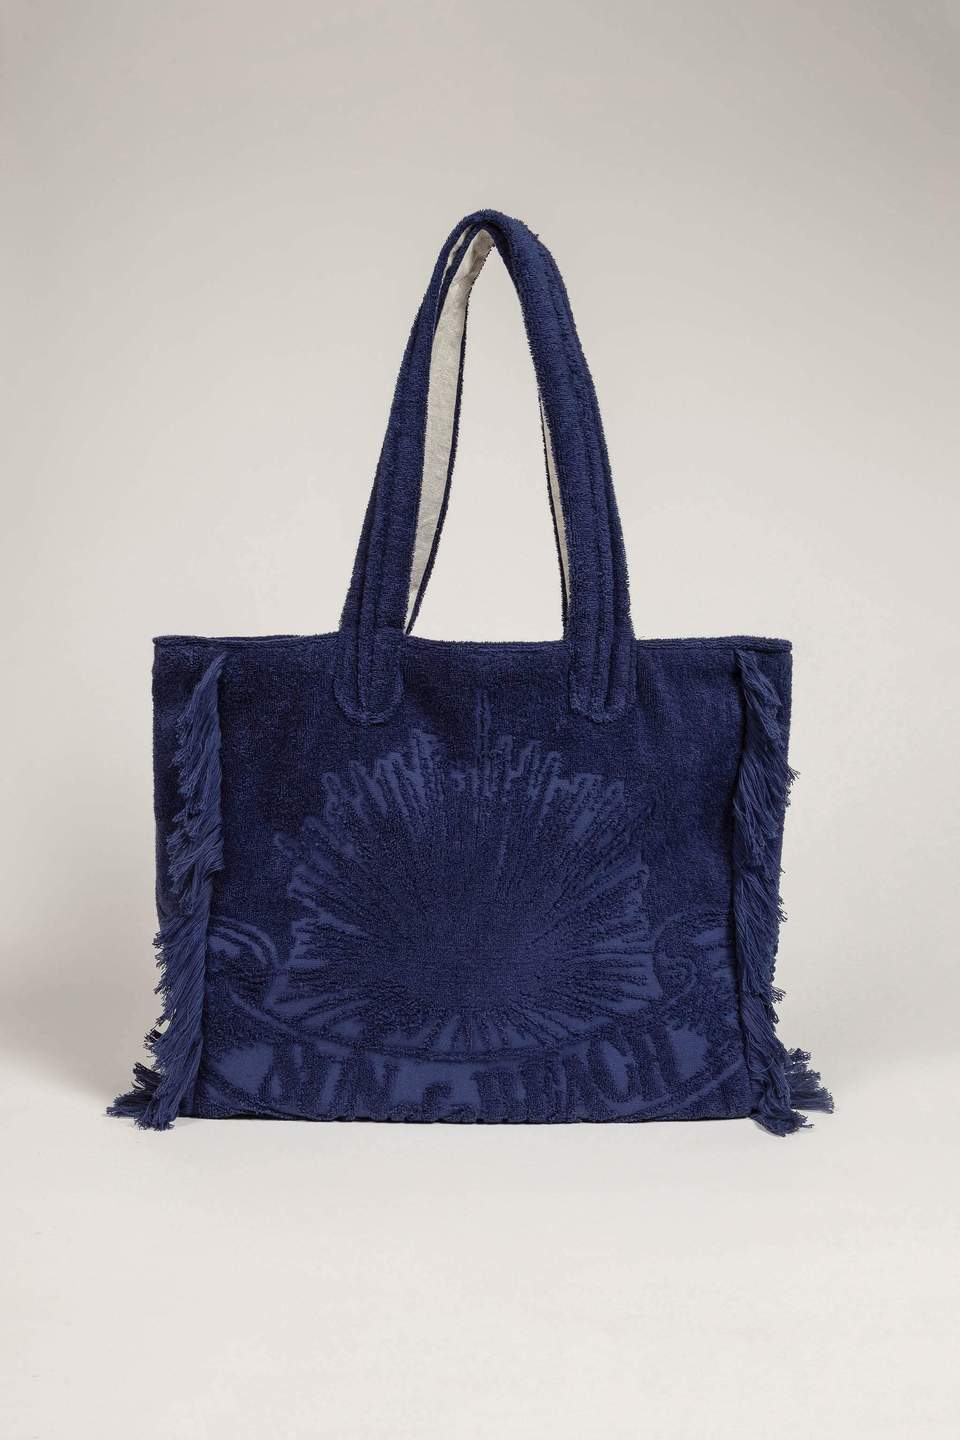 Just Navy | Terry Tote Beach Bag